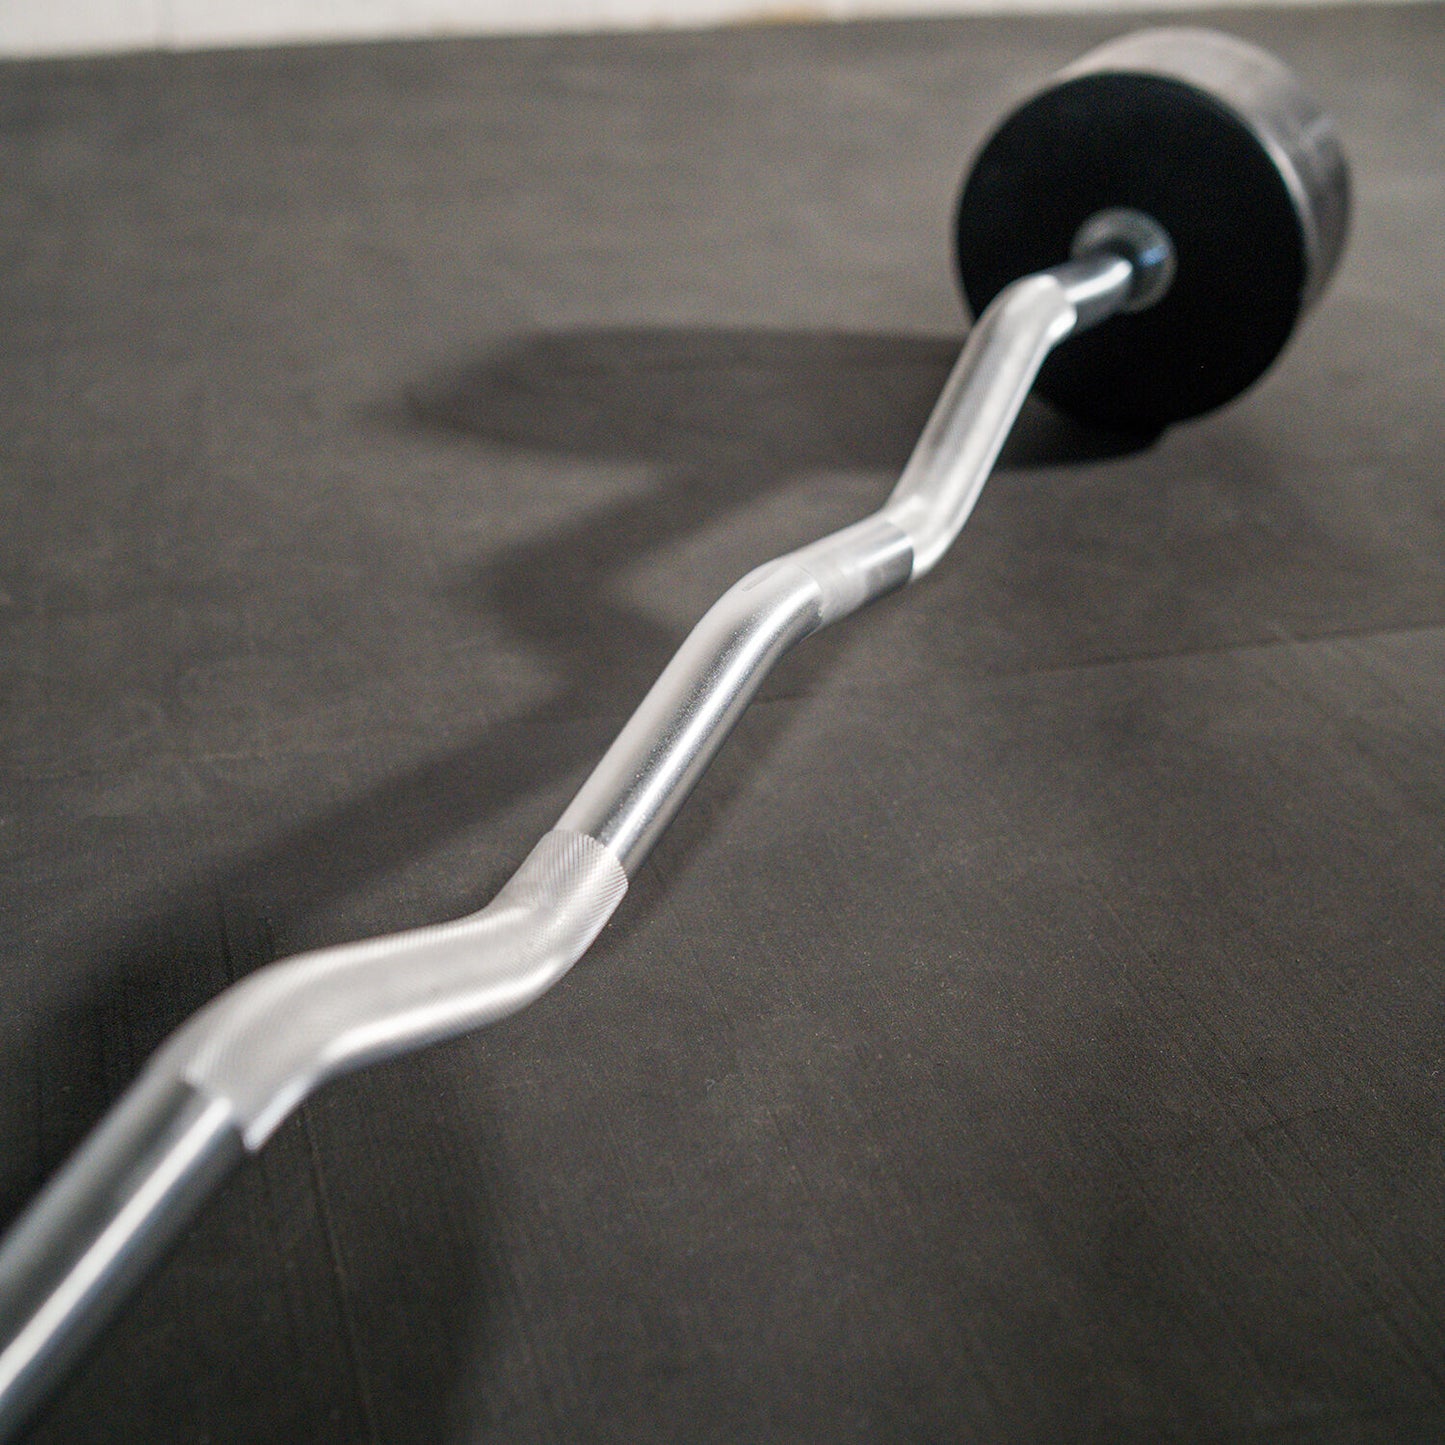 110 LB EZ Curl Rubber Fixed Barbell - view 3